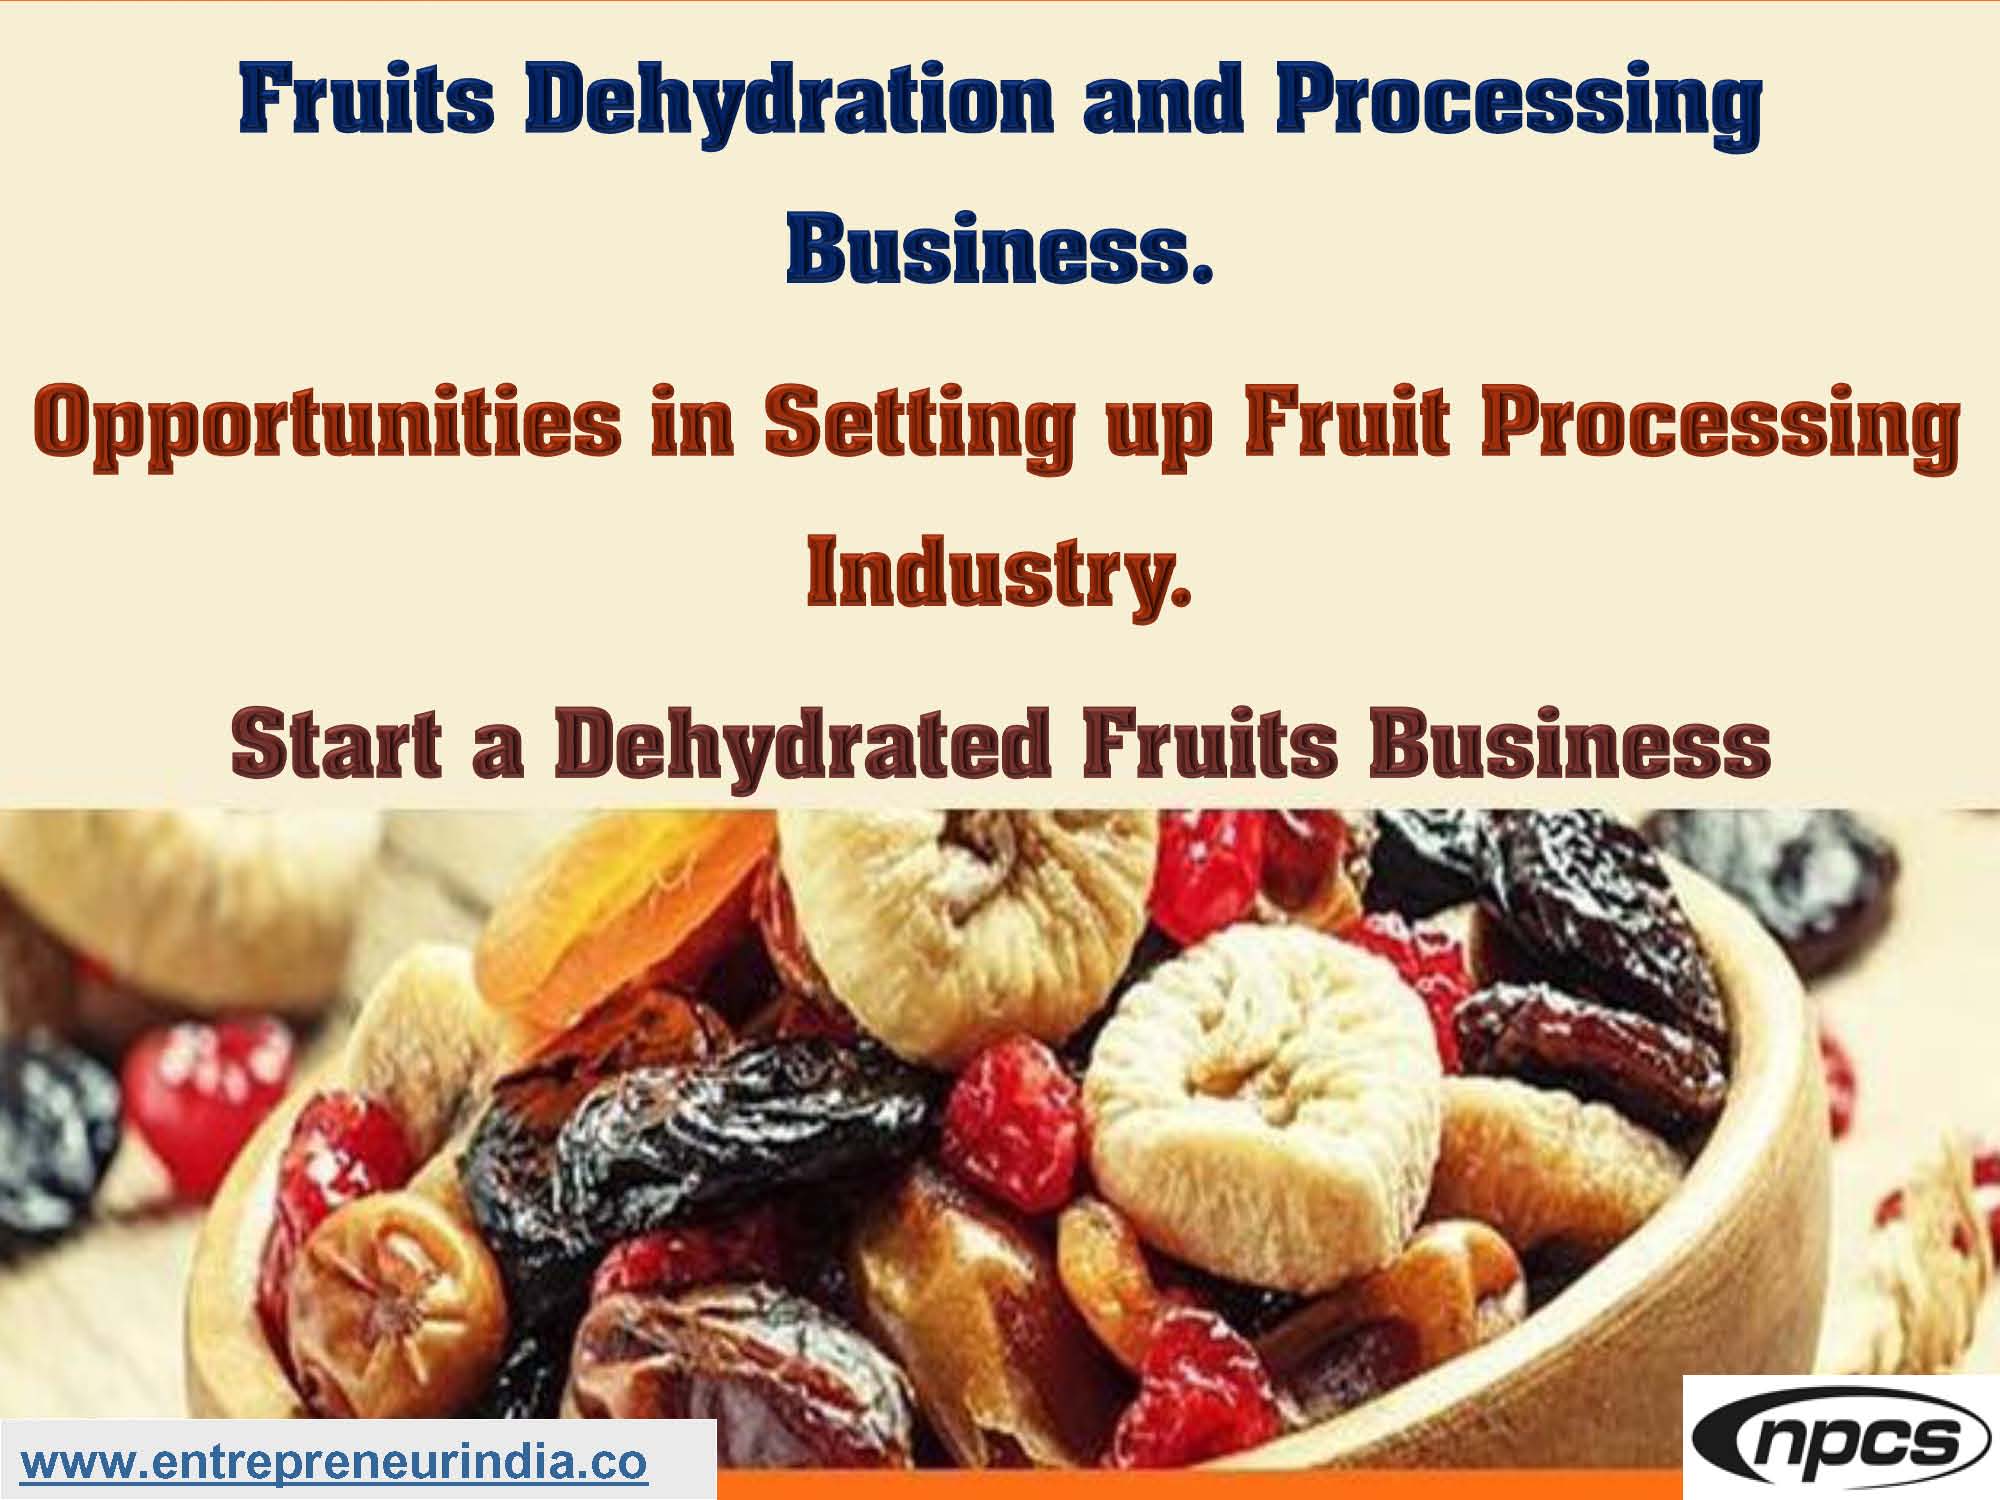 Fruits Dehydration and Processing Business